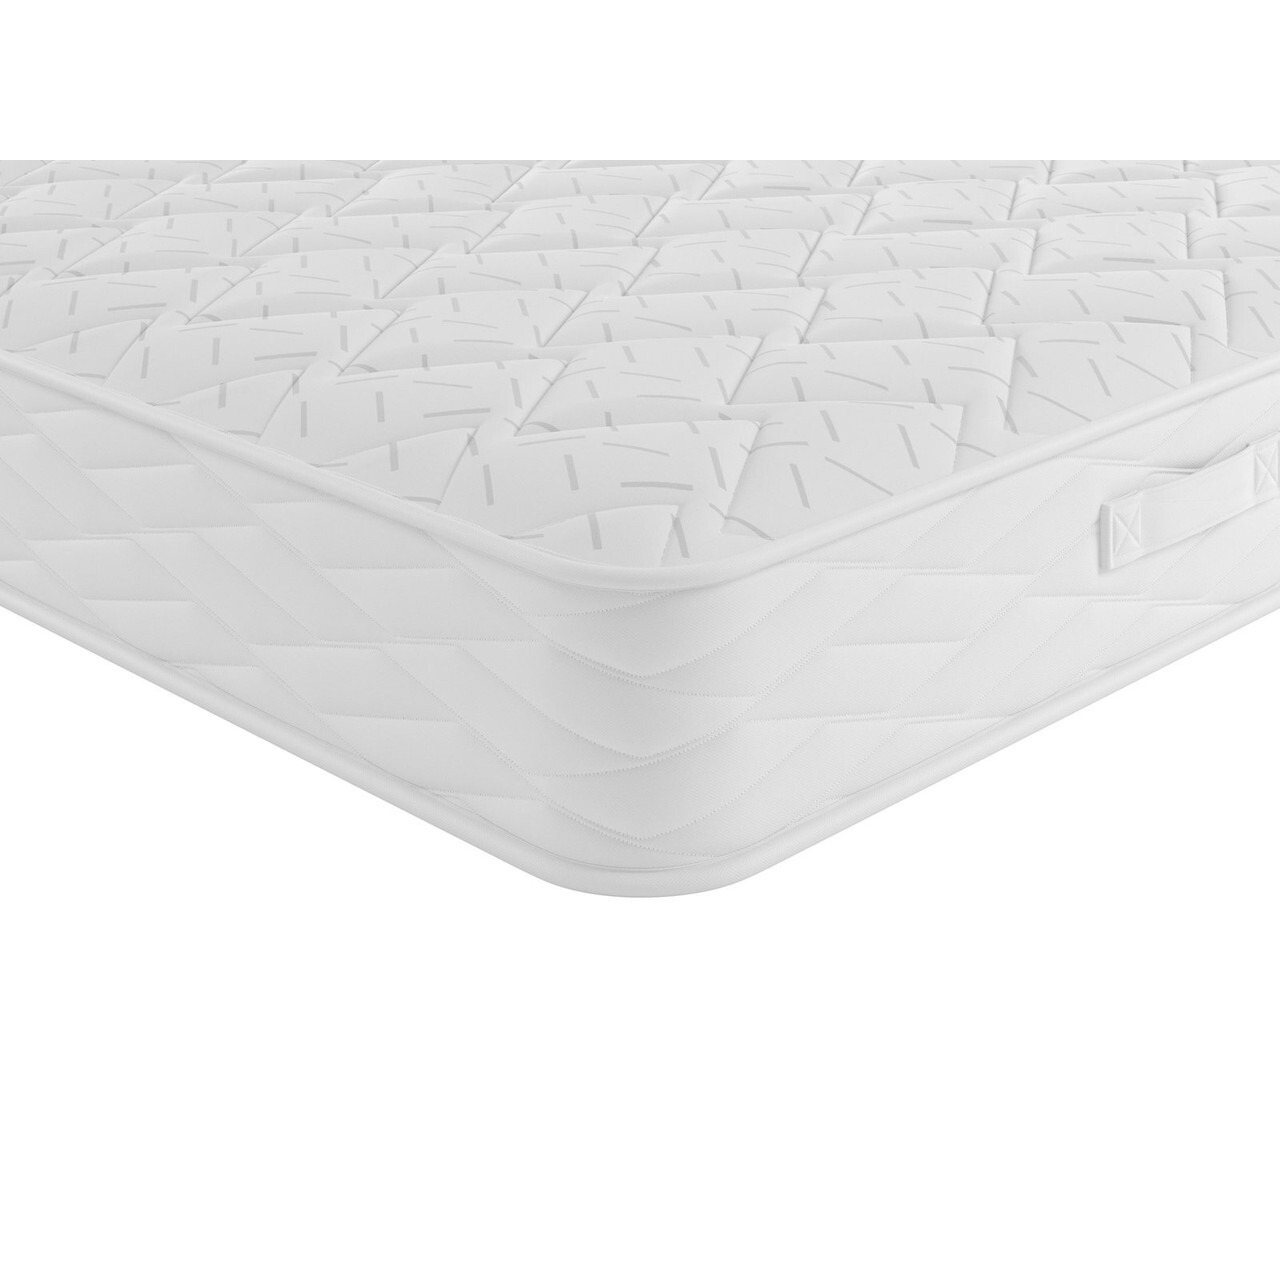 Simply By Bensons Happy Mattress - image 1